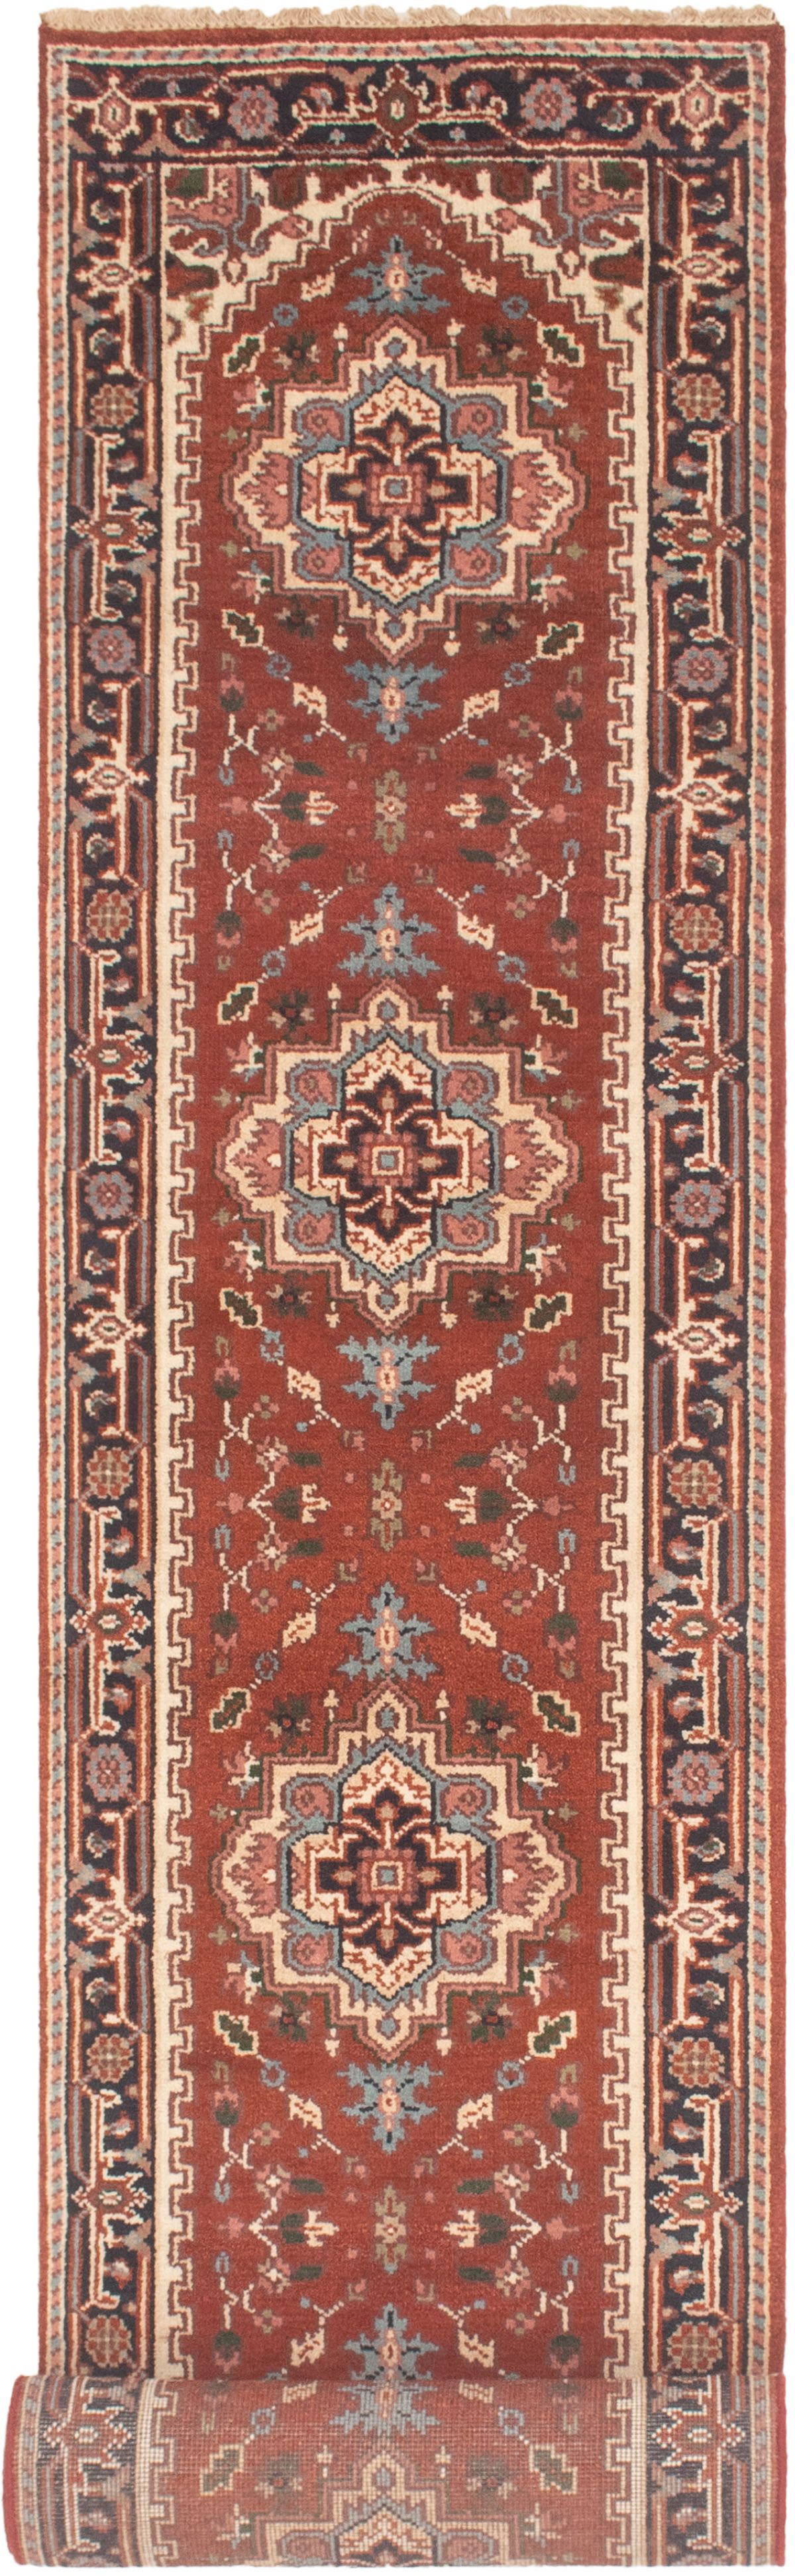 Hand-knotted Serapi Heritage Dark Copper Wool Rug 2'6" x 15'9" Size: 2'6" x 15'9"  